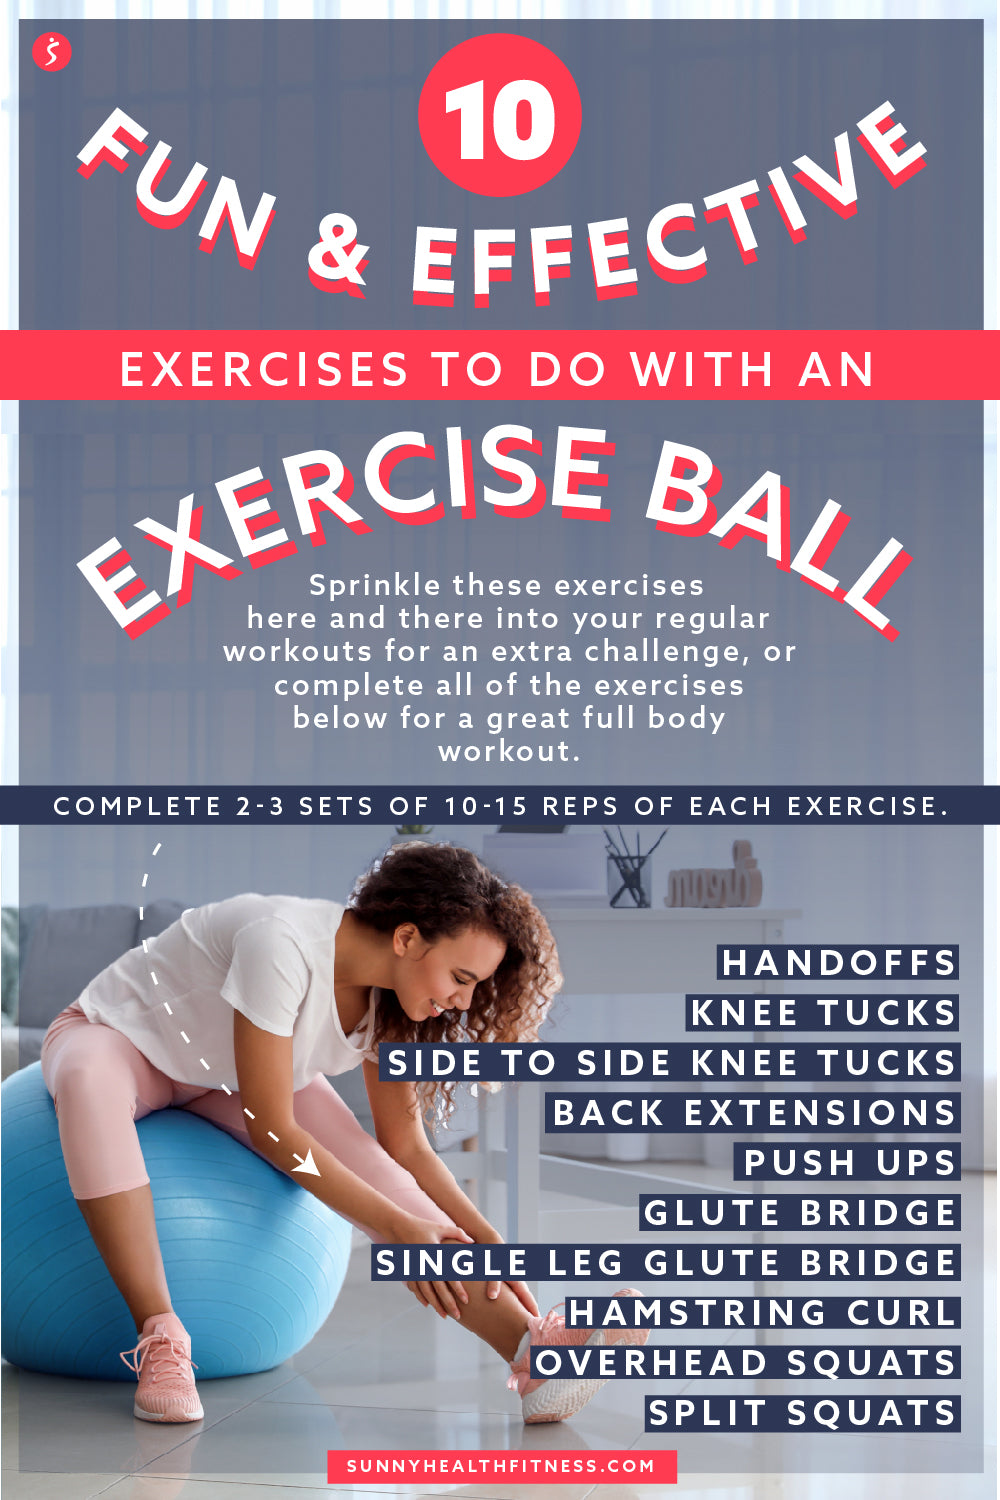 Don't Forget the Equipment: How to Choose an Exercise Ball